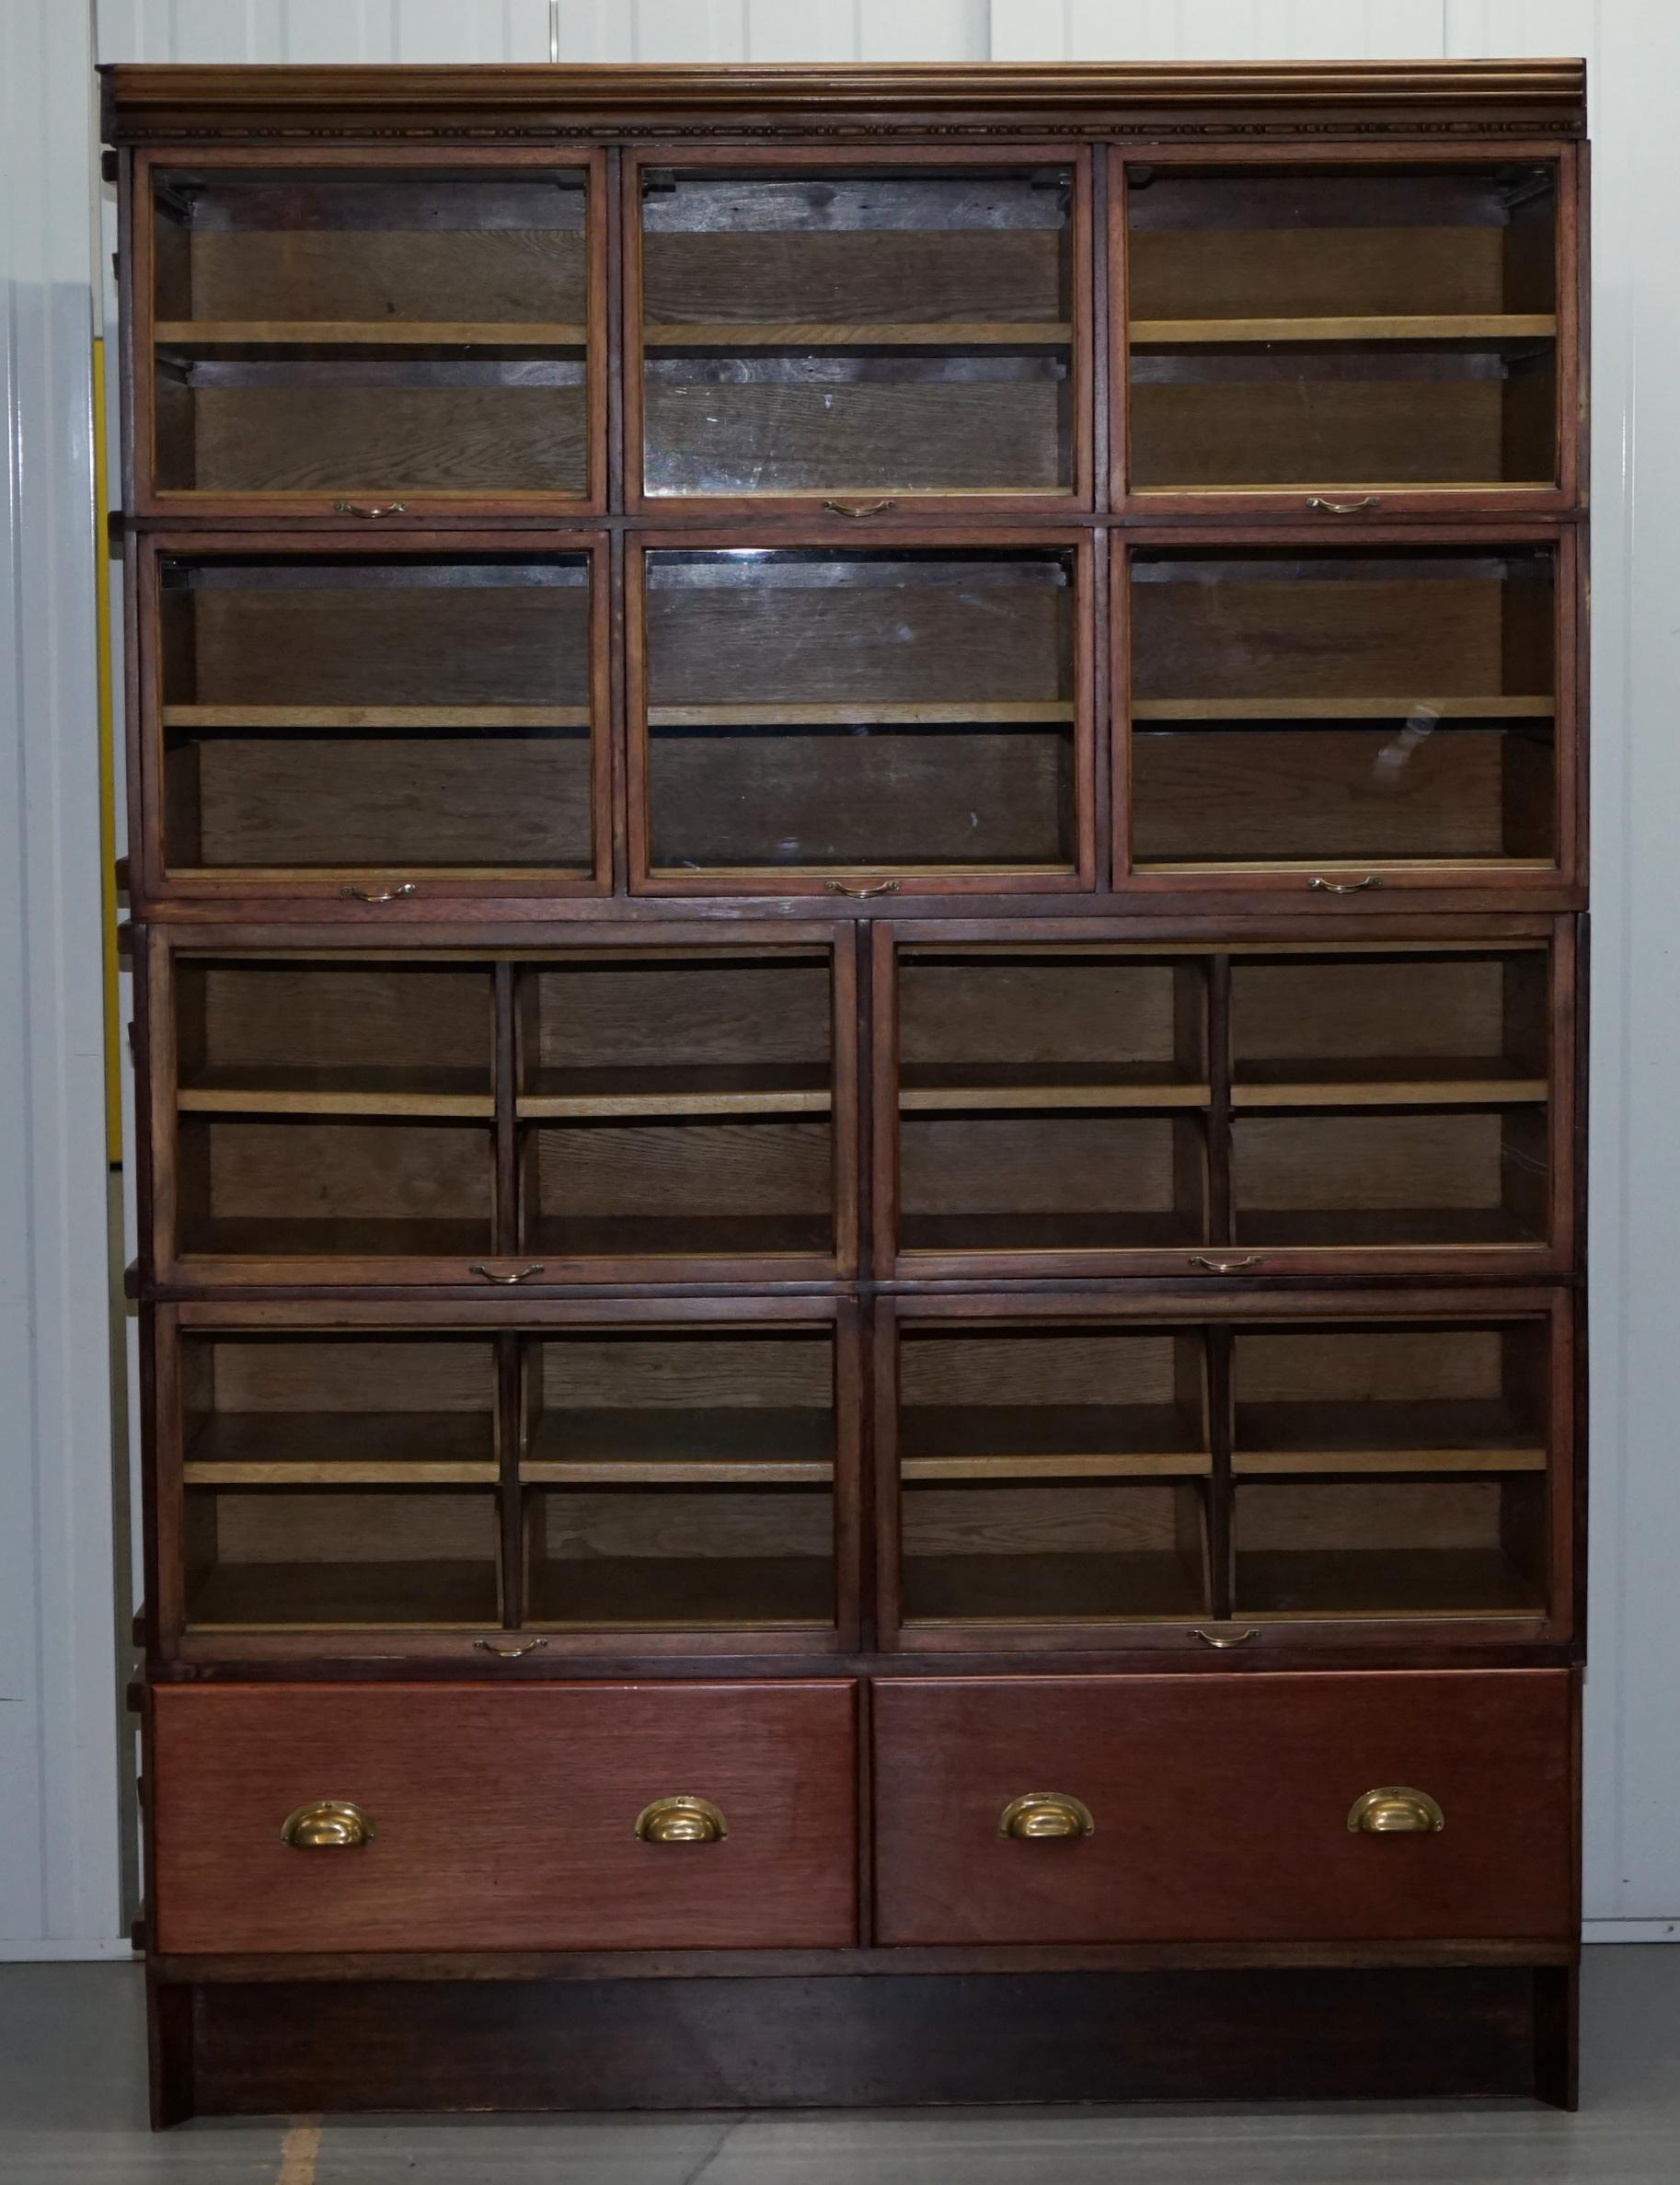 We are delighted to offer for sale this very rare original 1920’s solid oak with glass retractable doors stackable haberdashery cabinet

A very well made and functional piece, these cabinets were designed for formal gentleman’s retailers, you